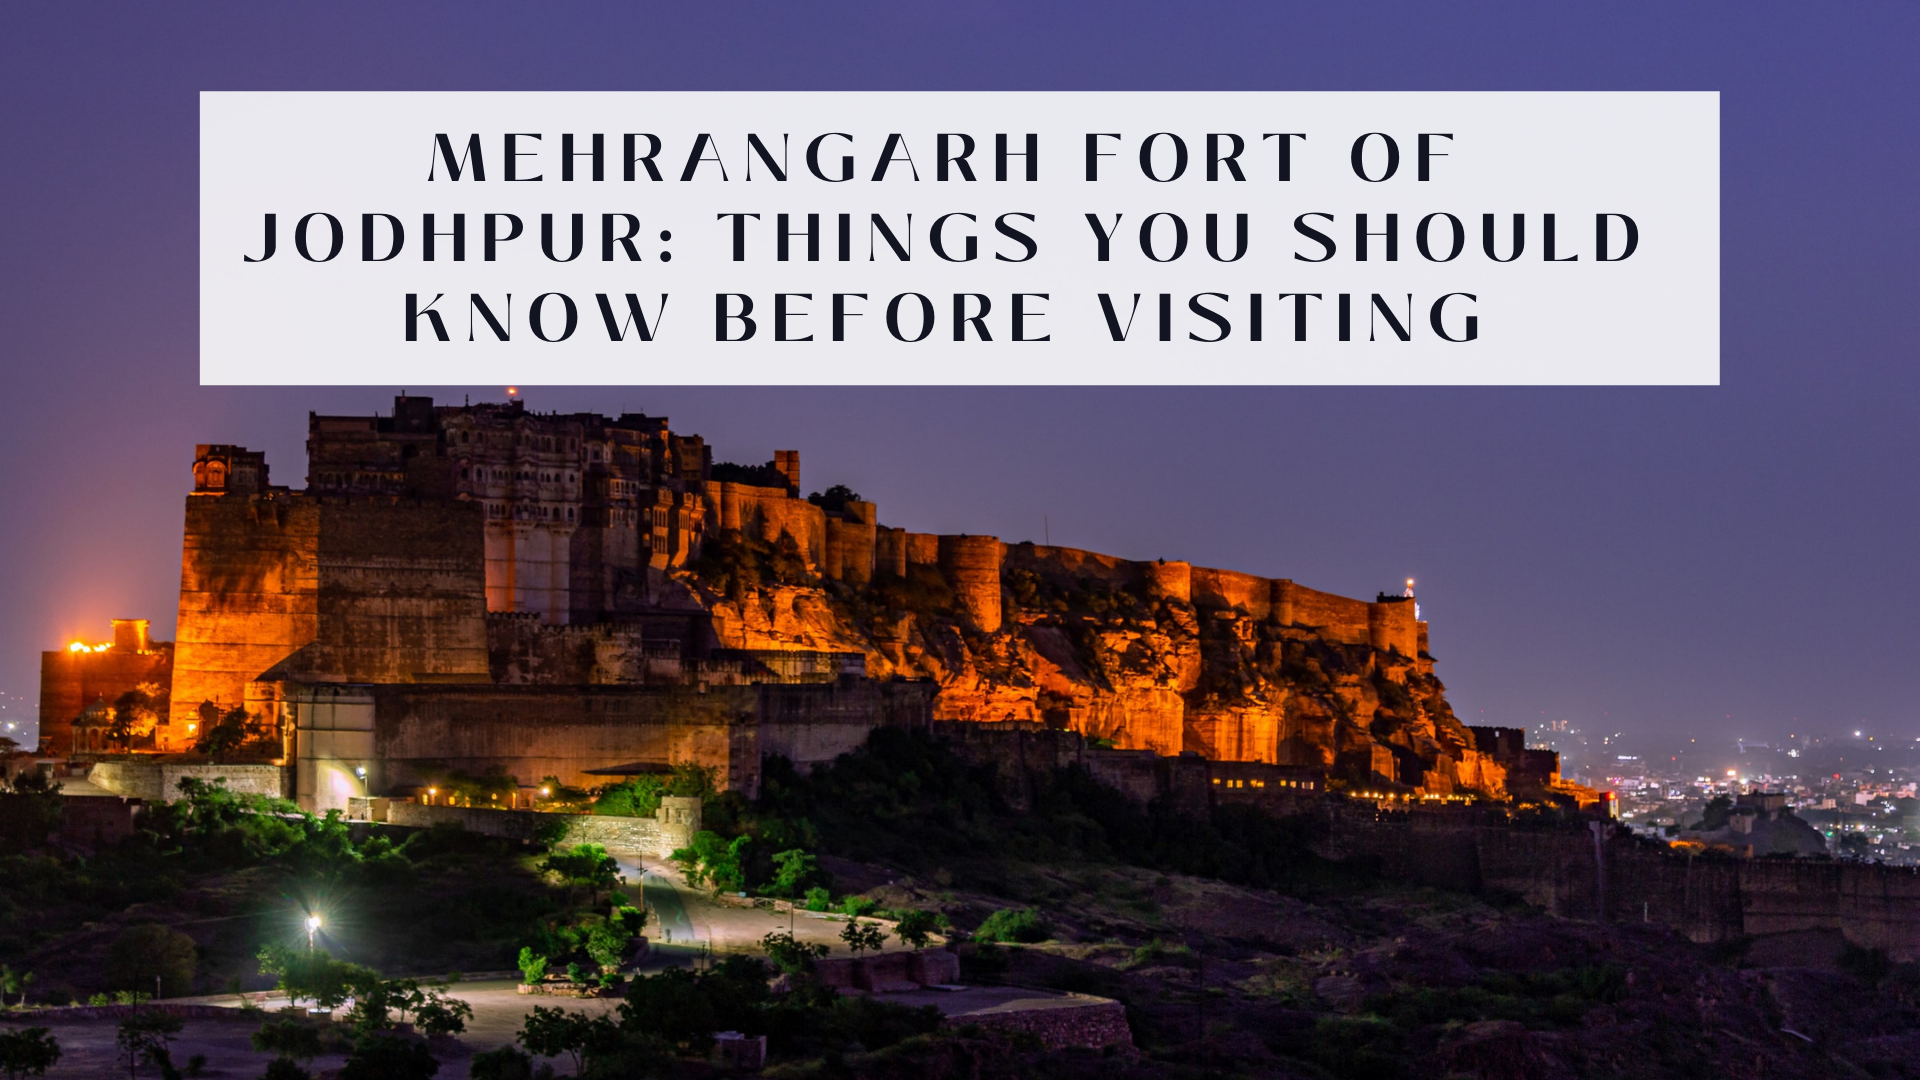 Mehrangarh Fort of Jodhpur: Things You Should Know Before Visiting